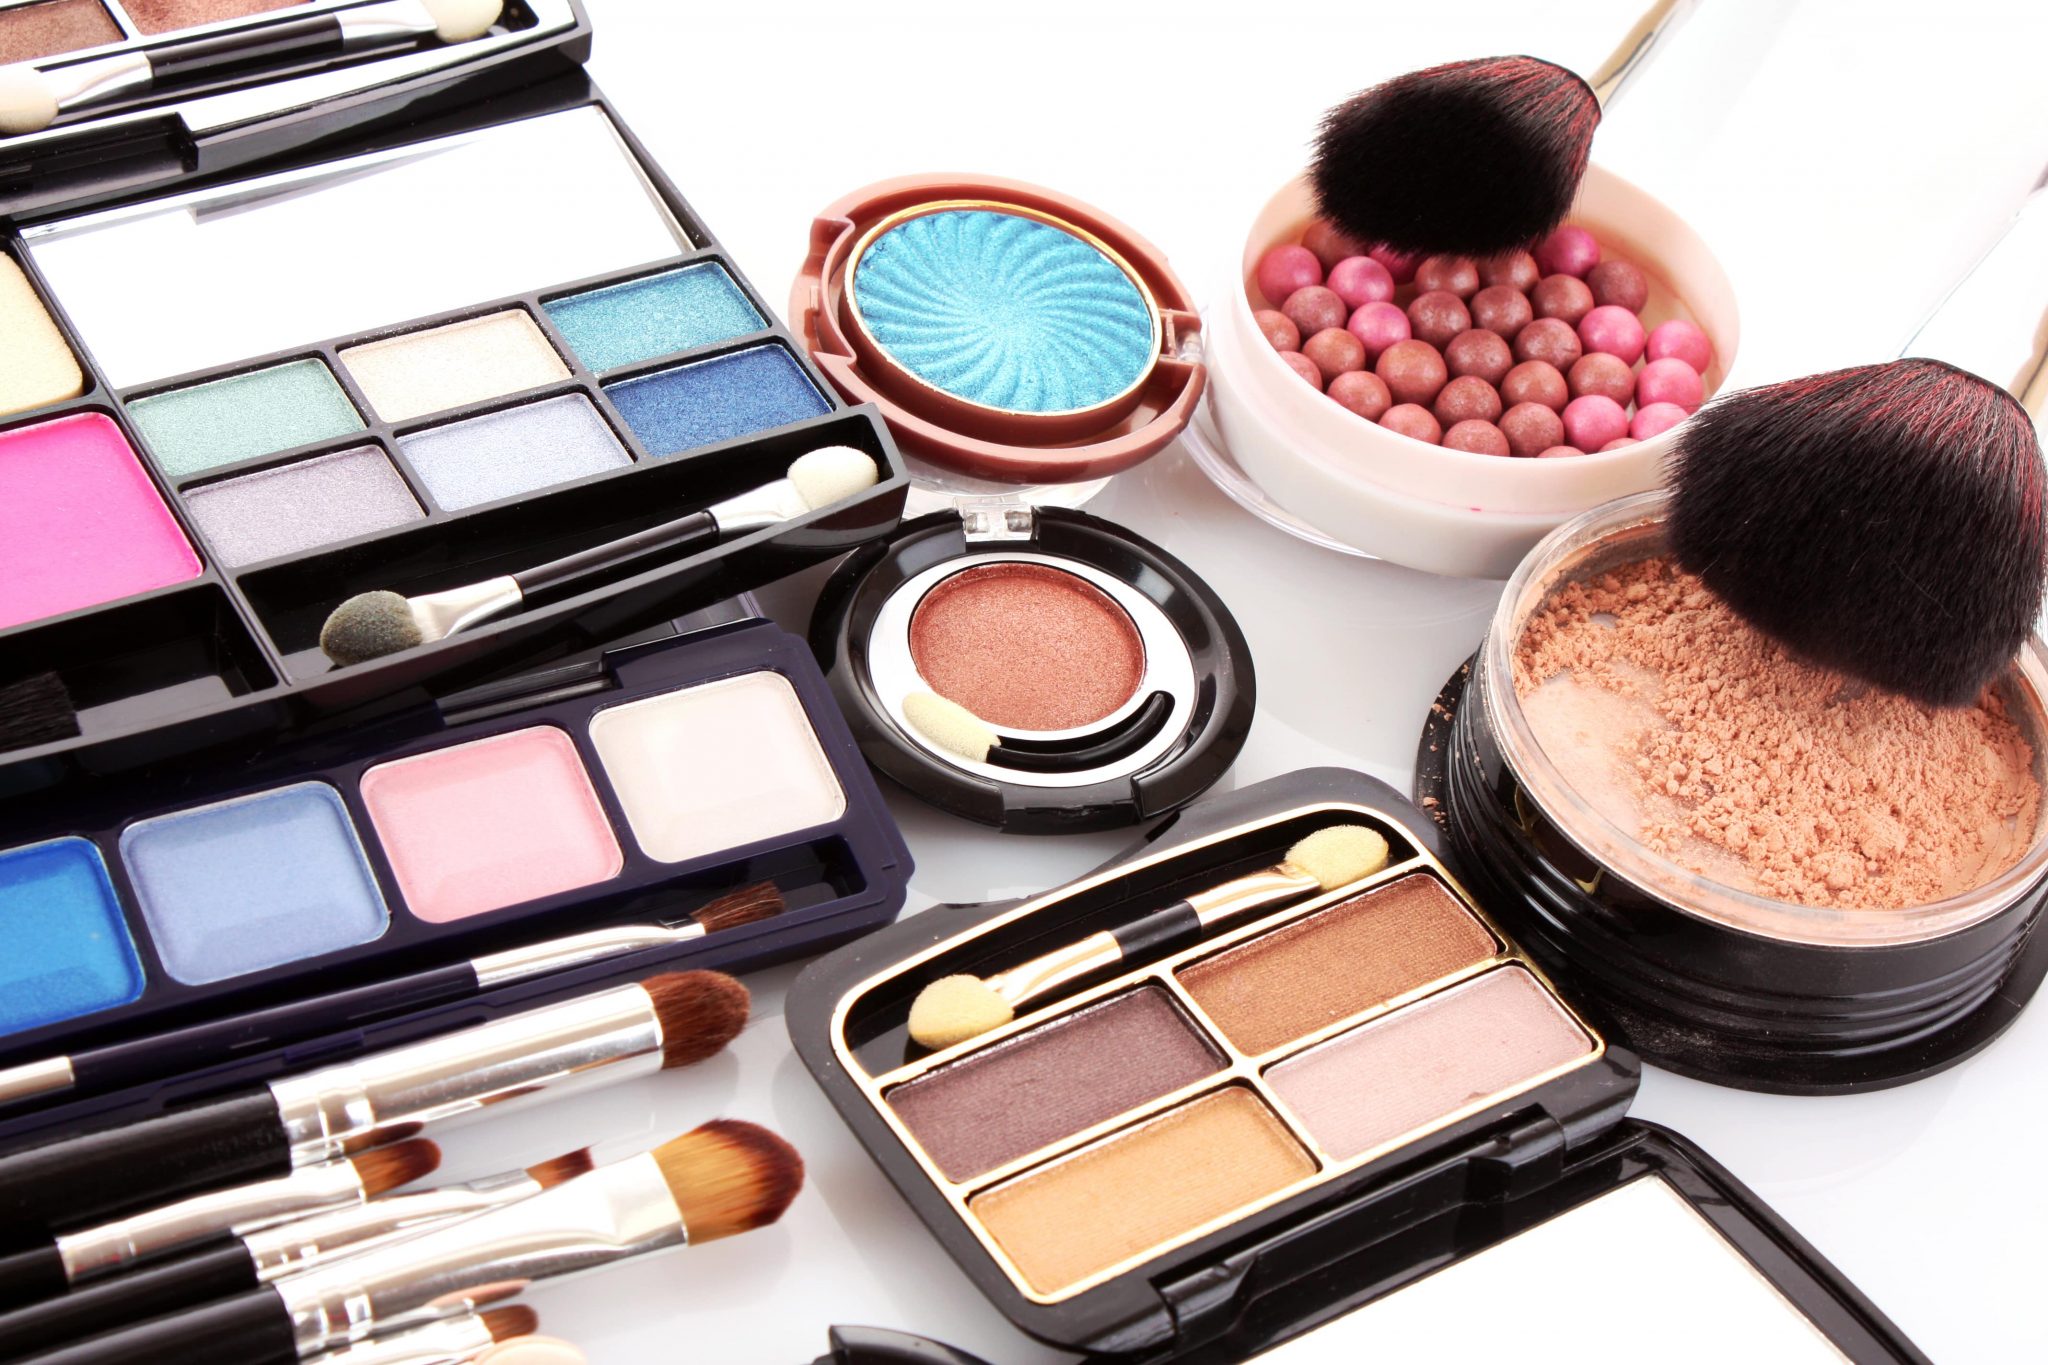 Is Makeup Forever cruelty free?